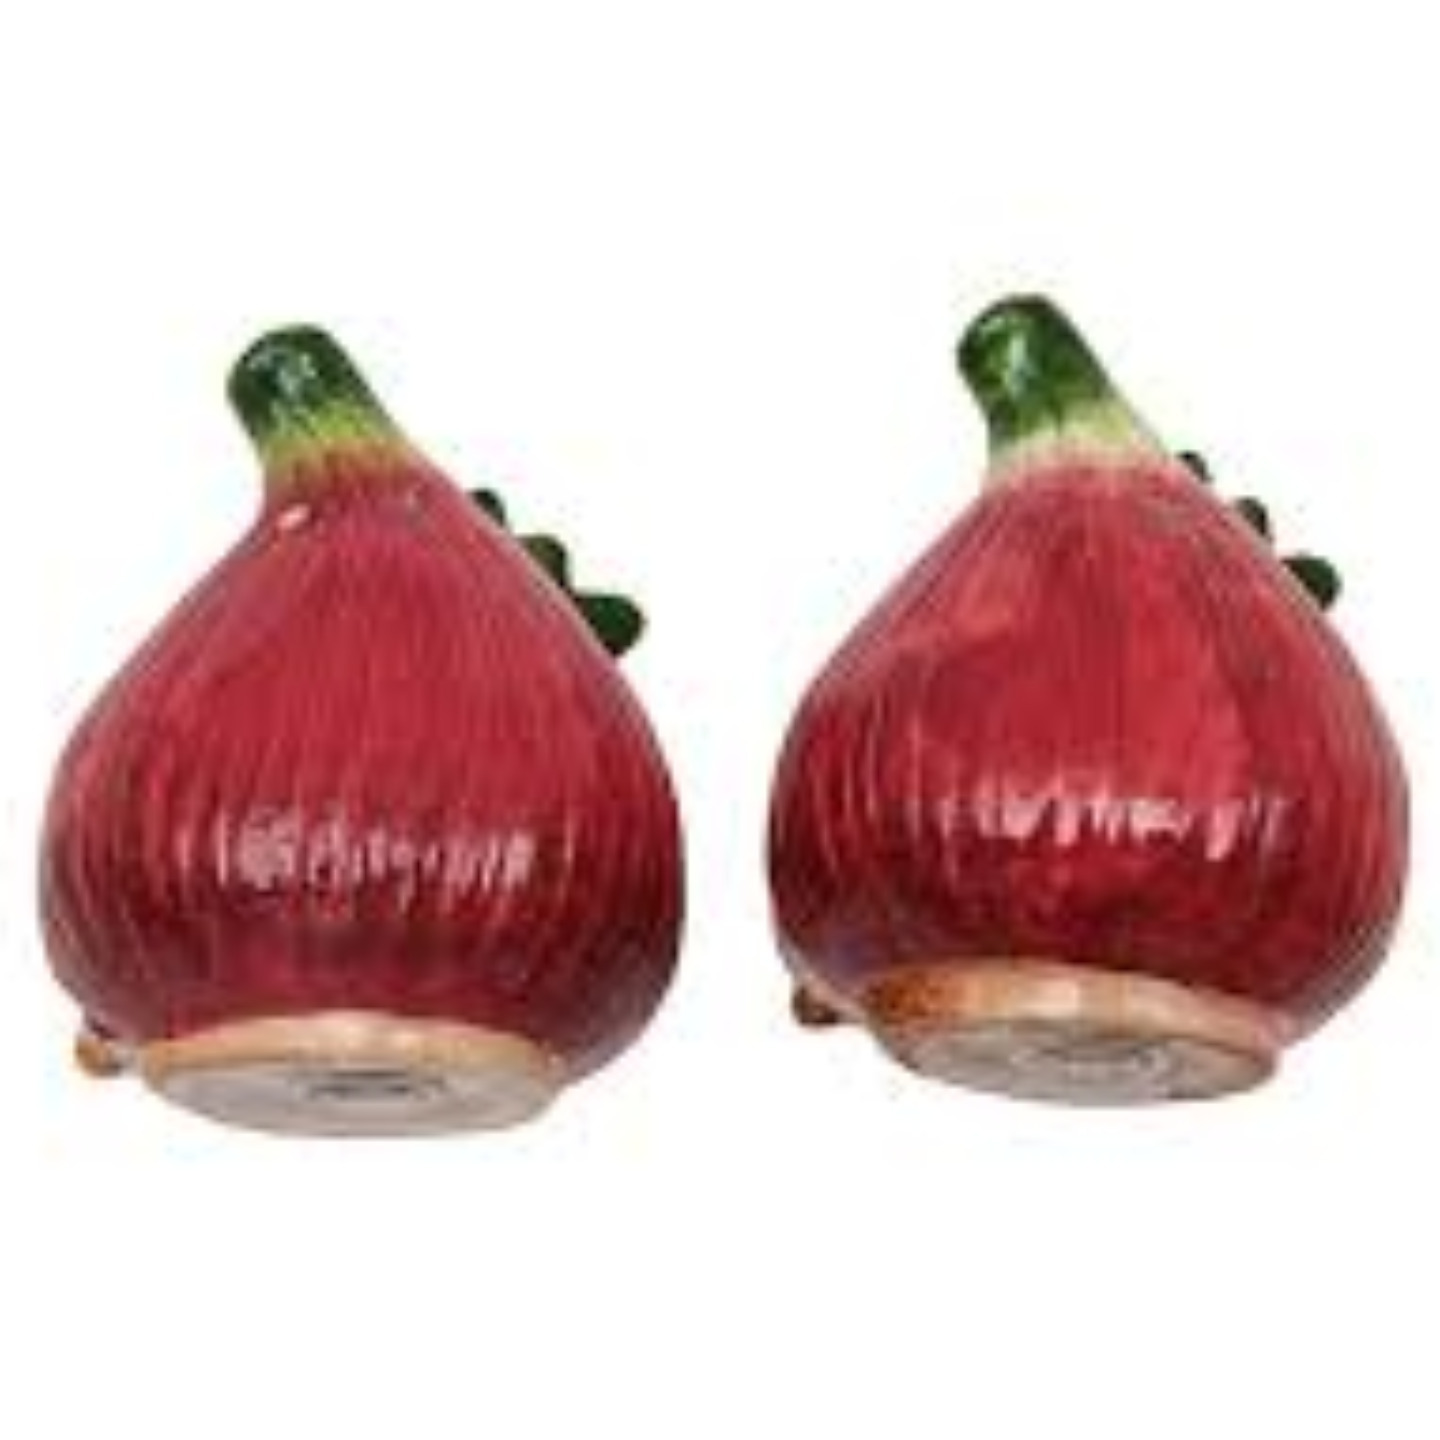 Onion Shaped Salt & Pepper Container